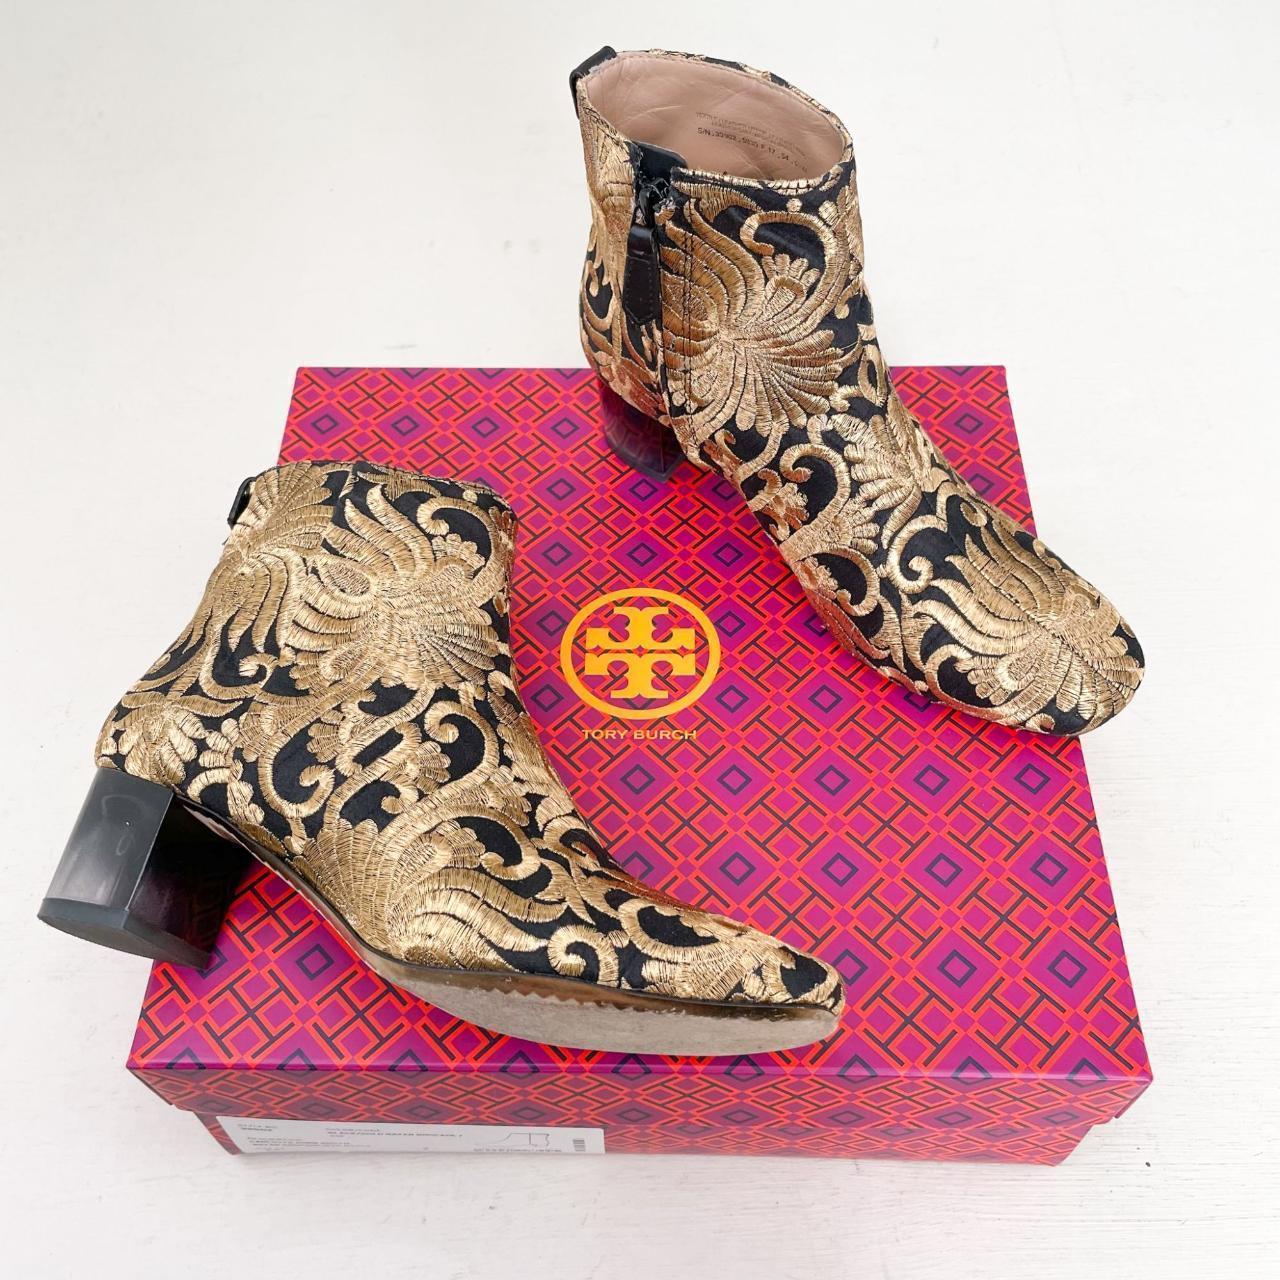 Tory Burch Women's Gold and Black Boots | Depop